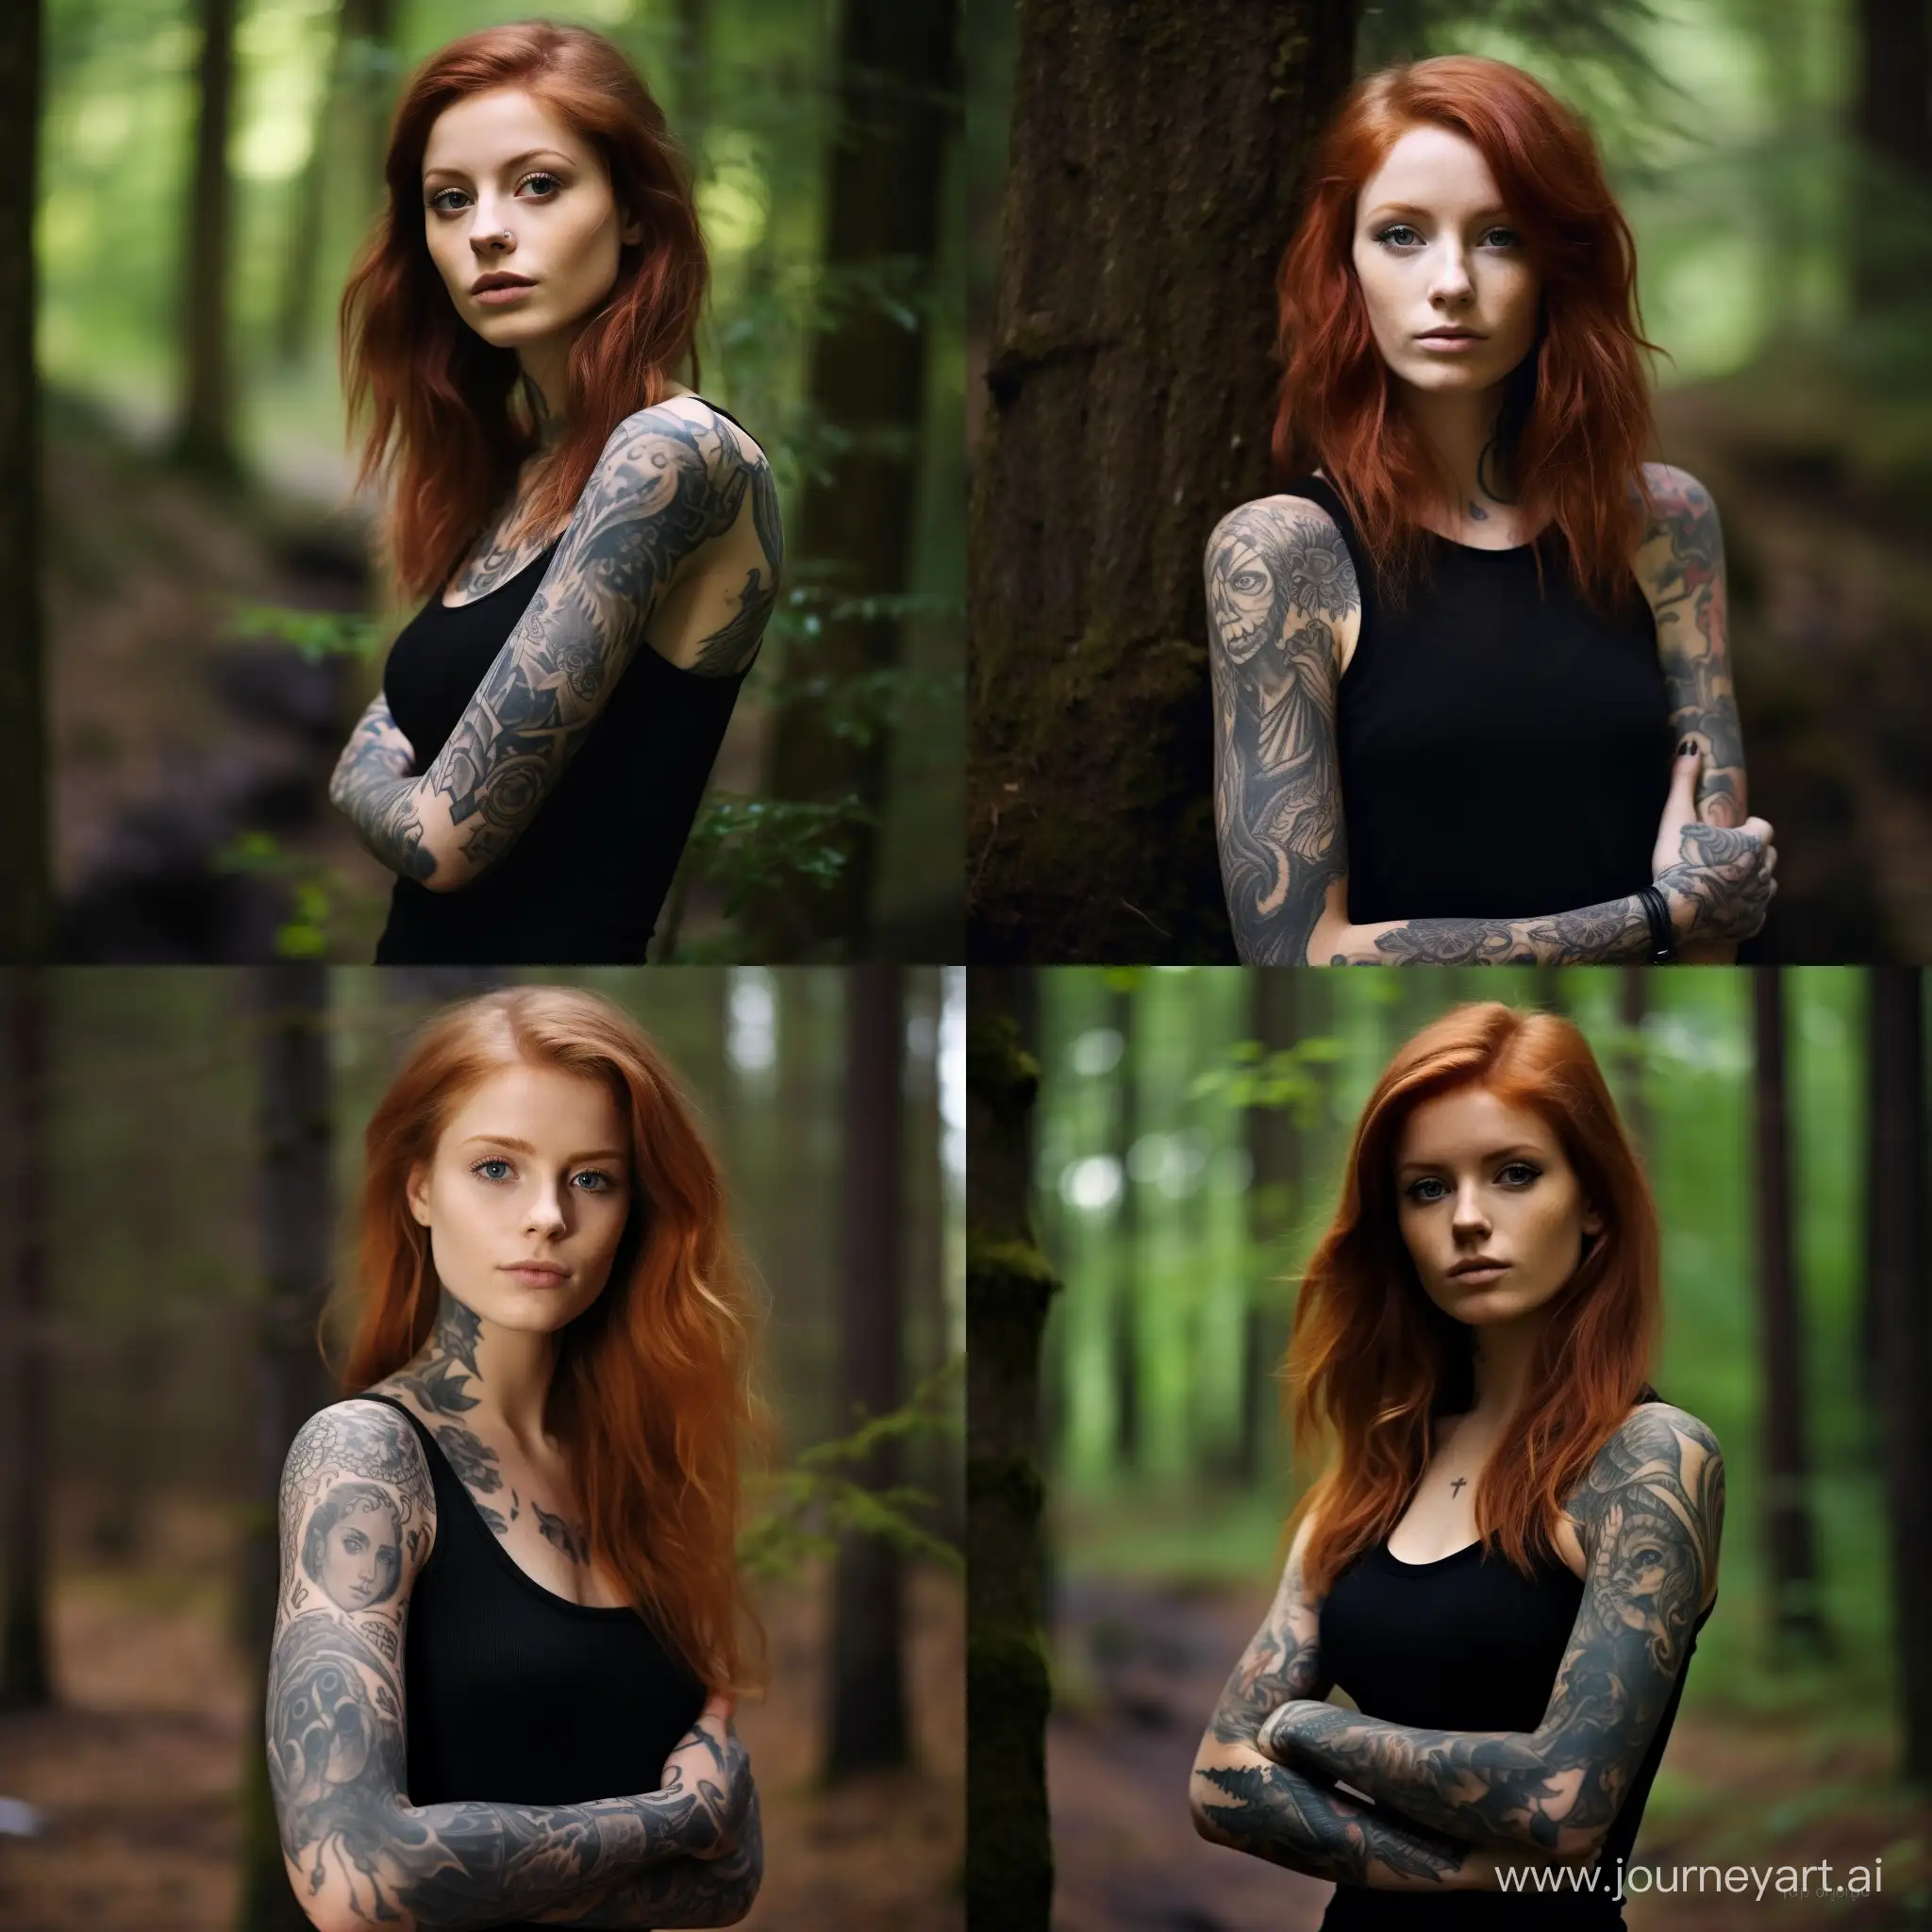 Mystical-RedHaired-Girl-in-Black-Dress-Enchanting-Forest-Portrait